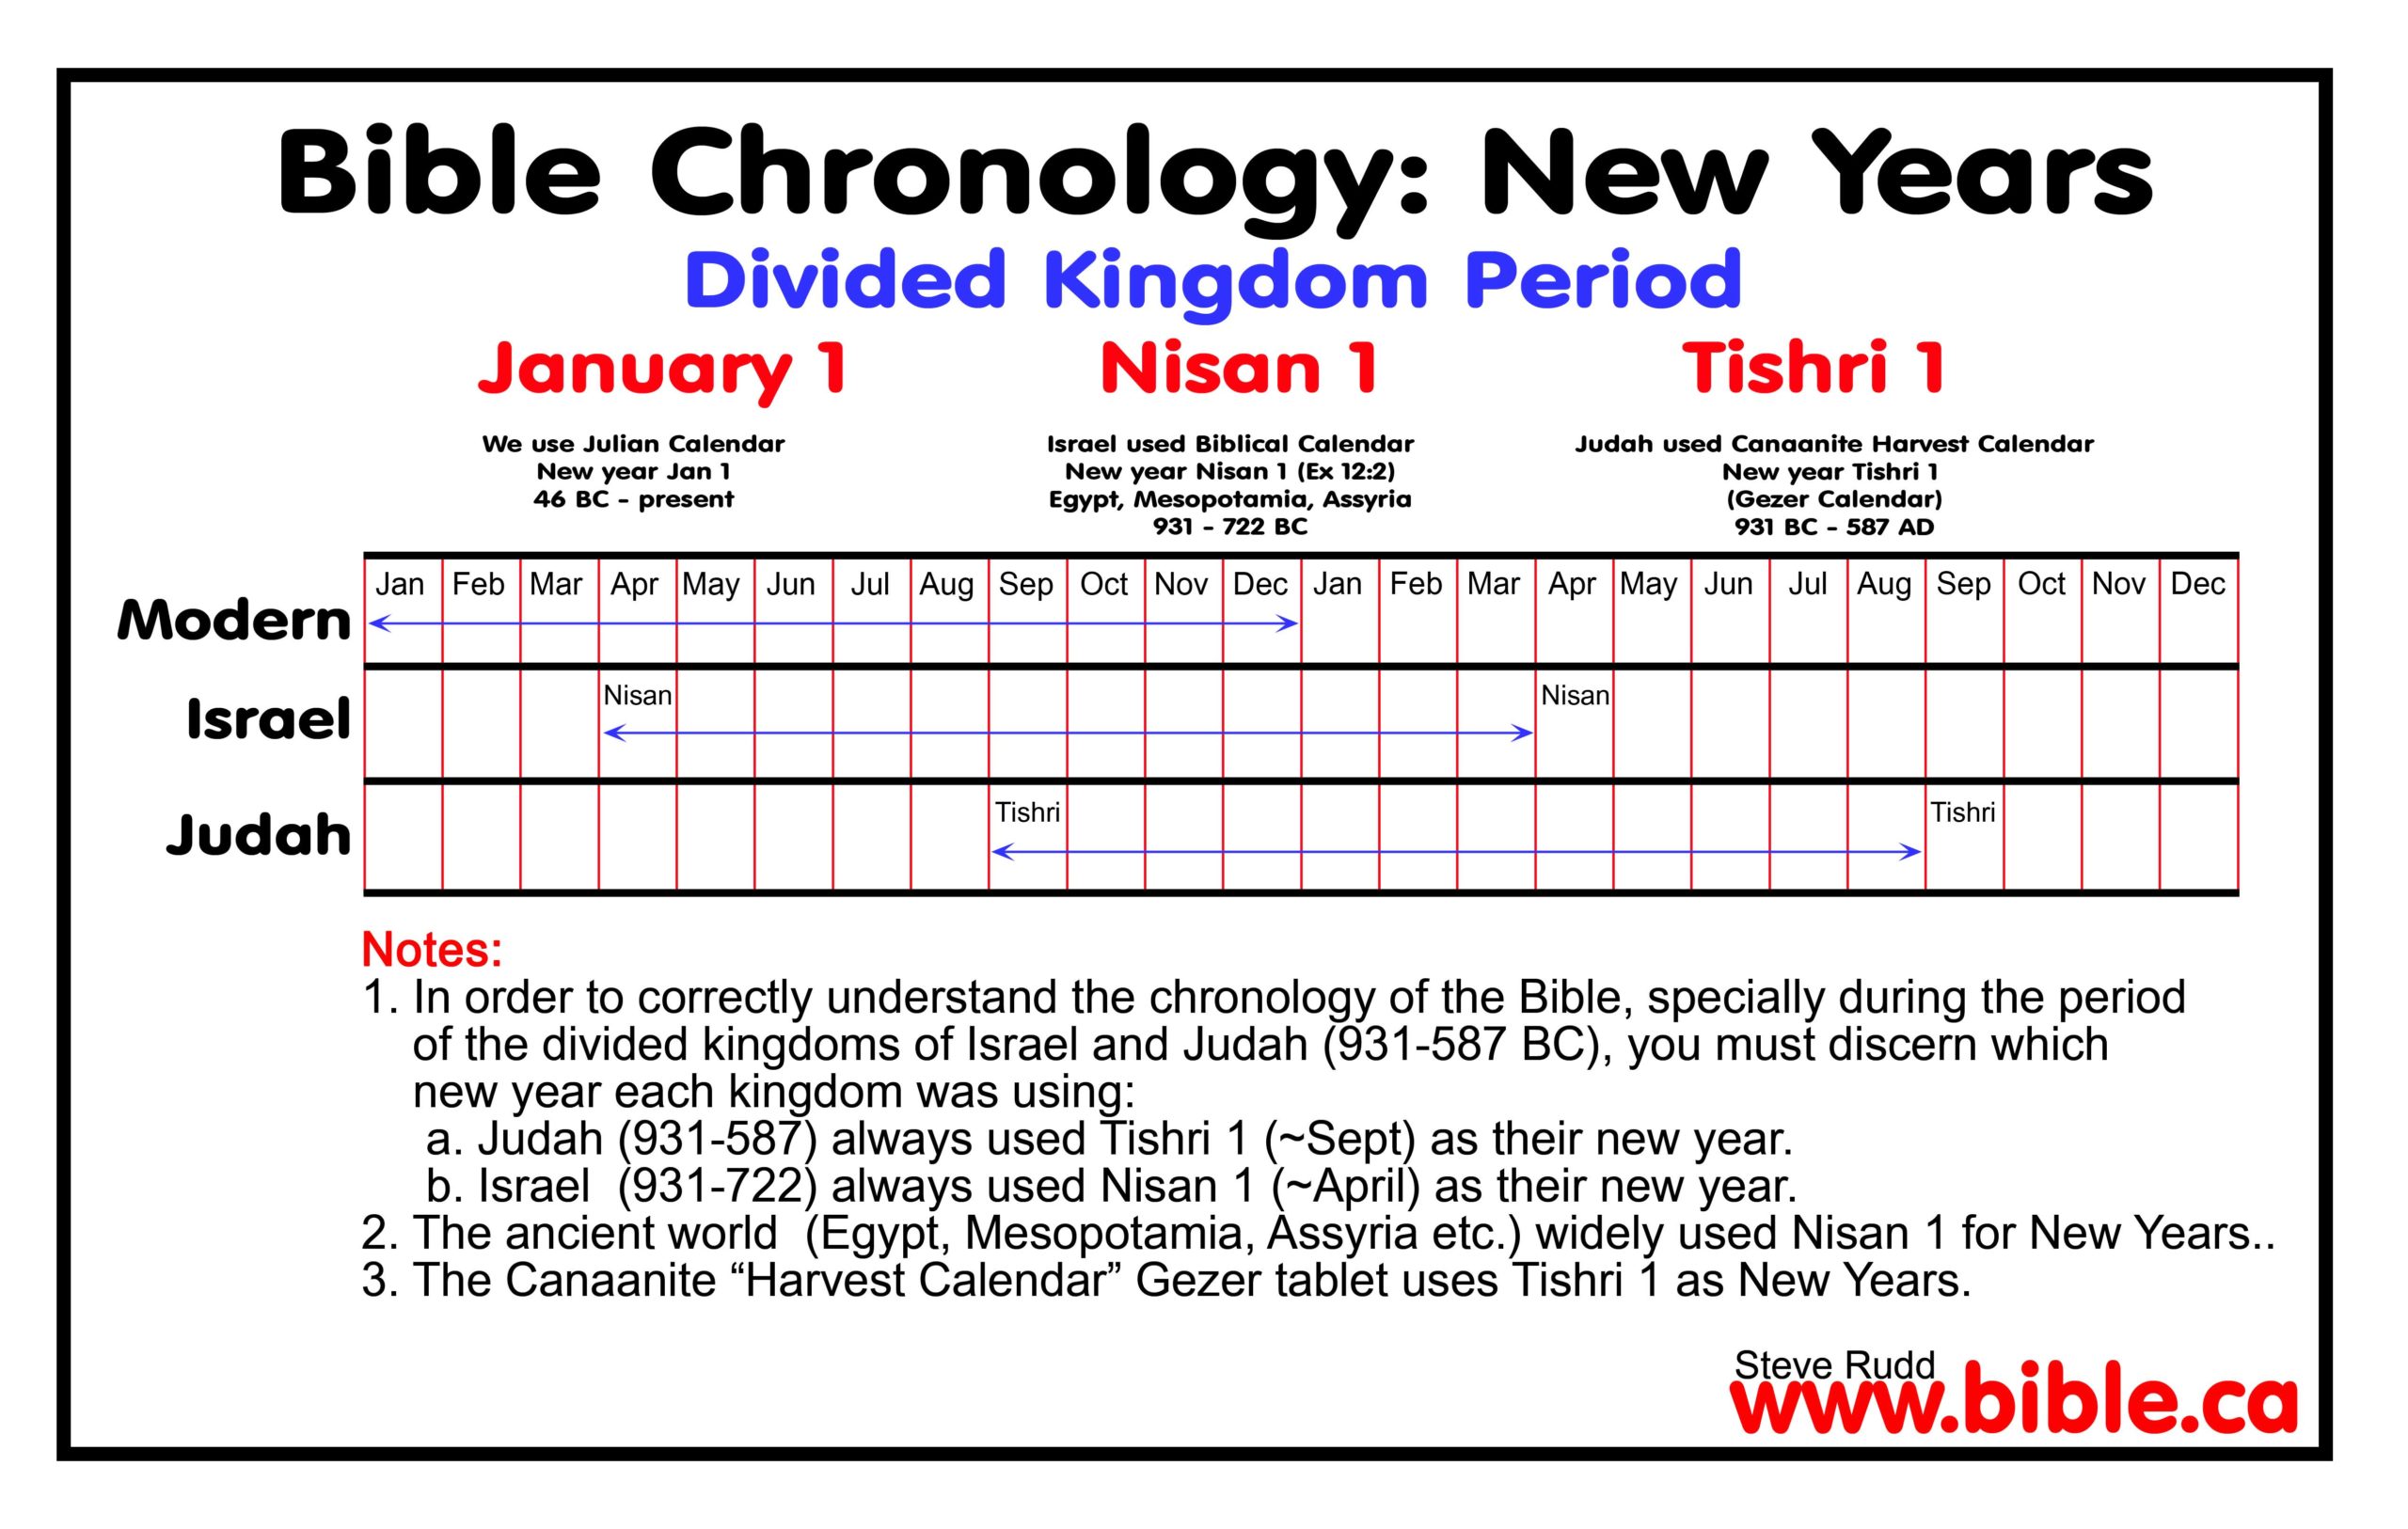 The New Years in in the Divided Kingdom Period (Chart)